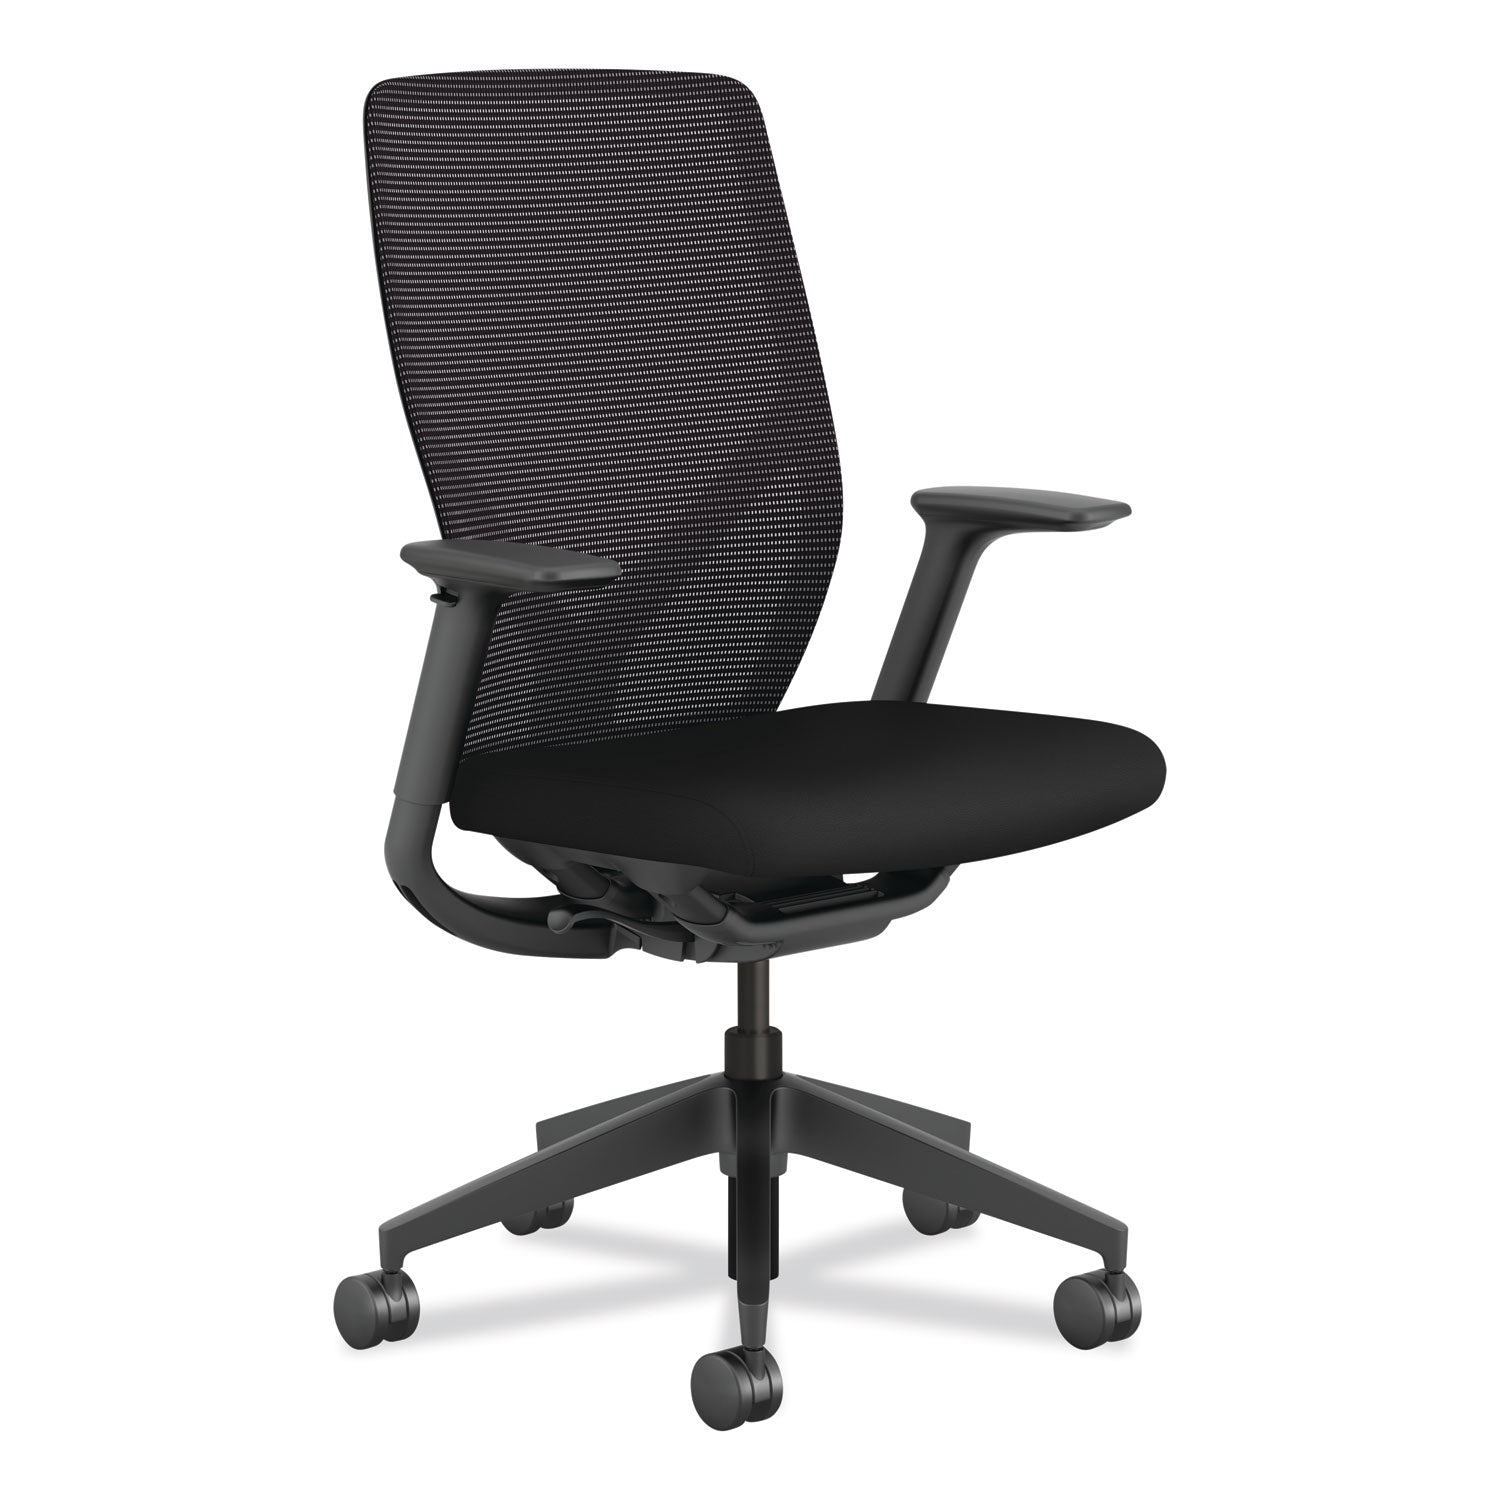 flexion-mesh-back-task-chair-up-to-300-lb-1481-to-197-seat-height-24-back-height-black-ships-in-7-10-business-days_honfxt0stamu10t - 1